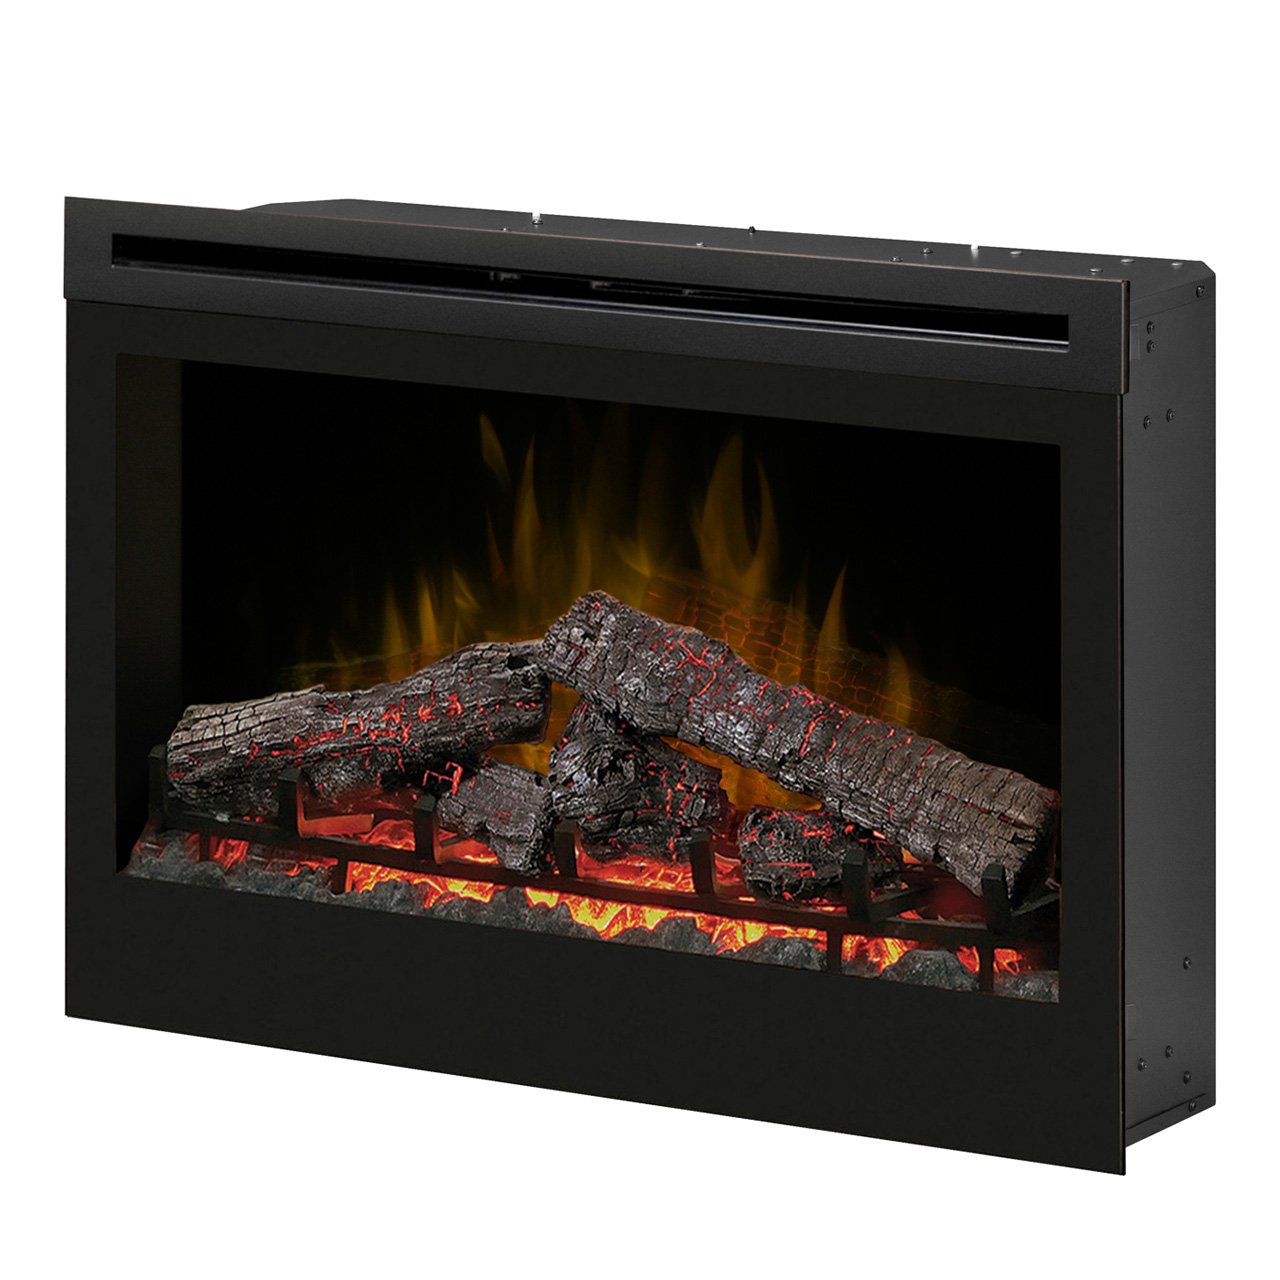 Gas Fireplace Units Awesome Dimplex Df3033st 33 Inch Self Trimming Electric Fireplace Insert